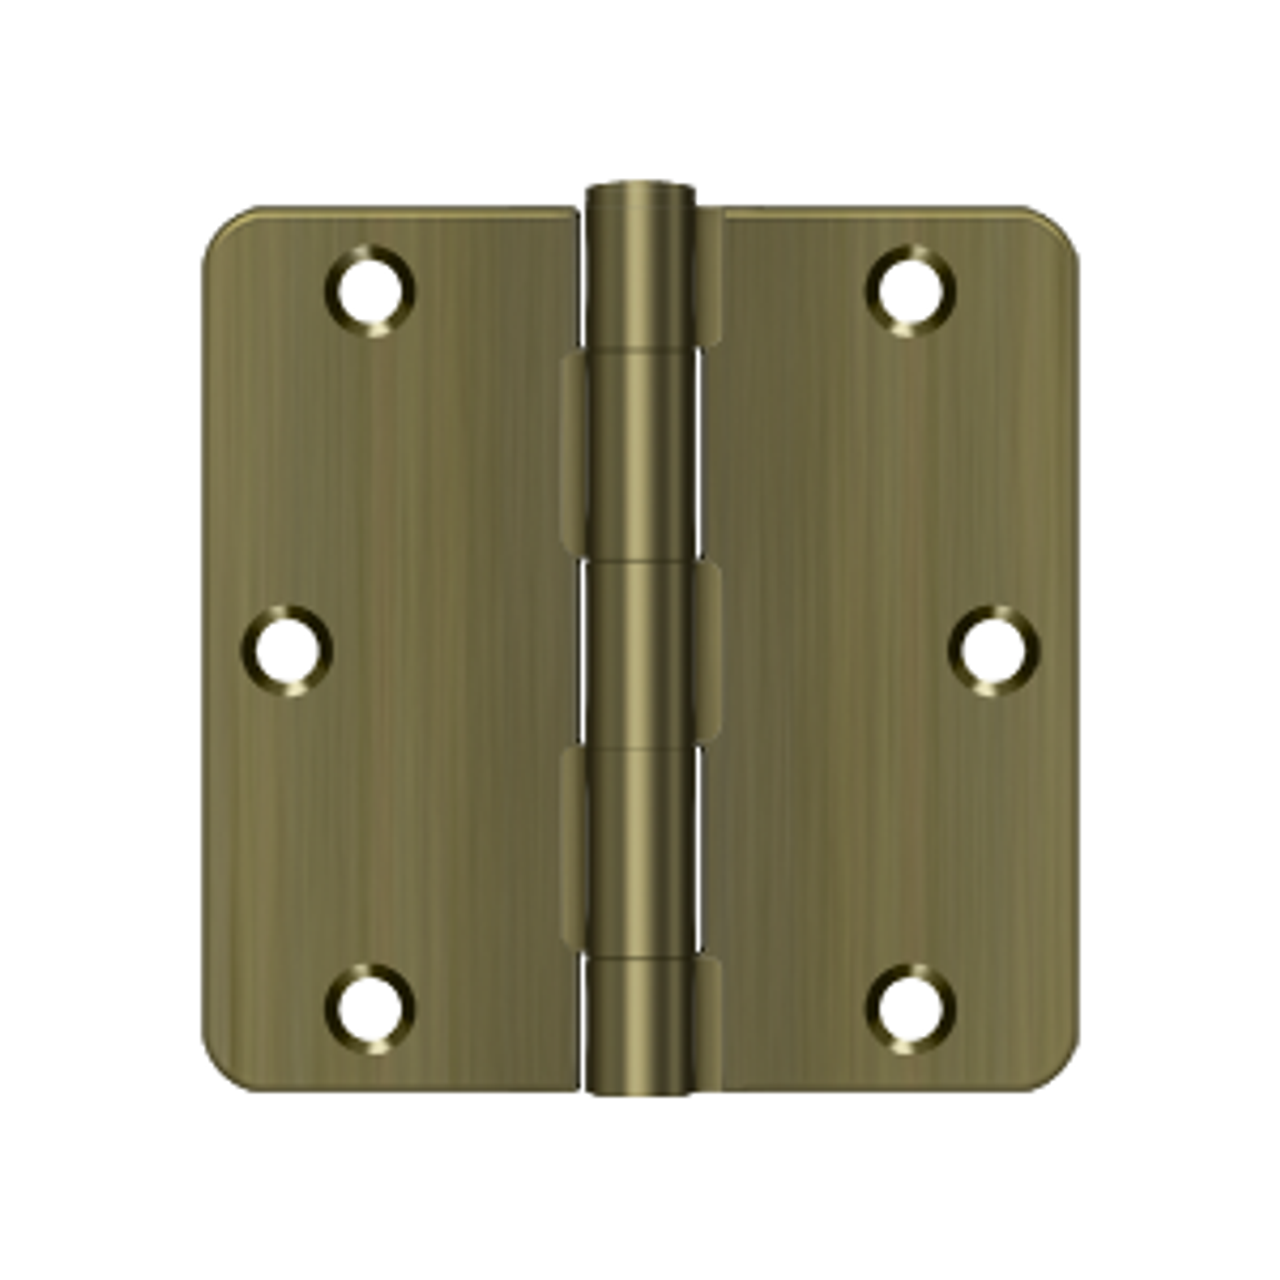 Deltana S35R4 3-1/2" X 3-1/2" X 1/4" RADIUS HINGE, RESIDENTIAL THICKNESS, STEEL MATERIAL